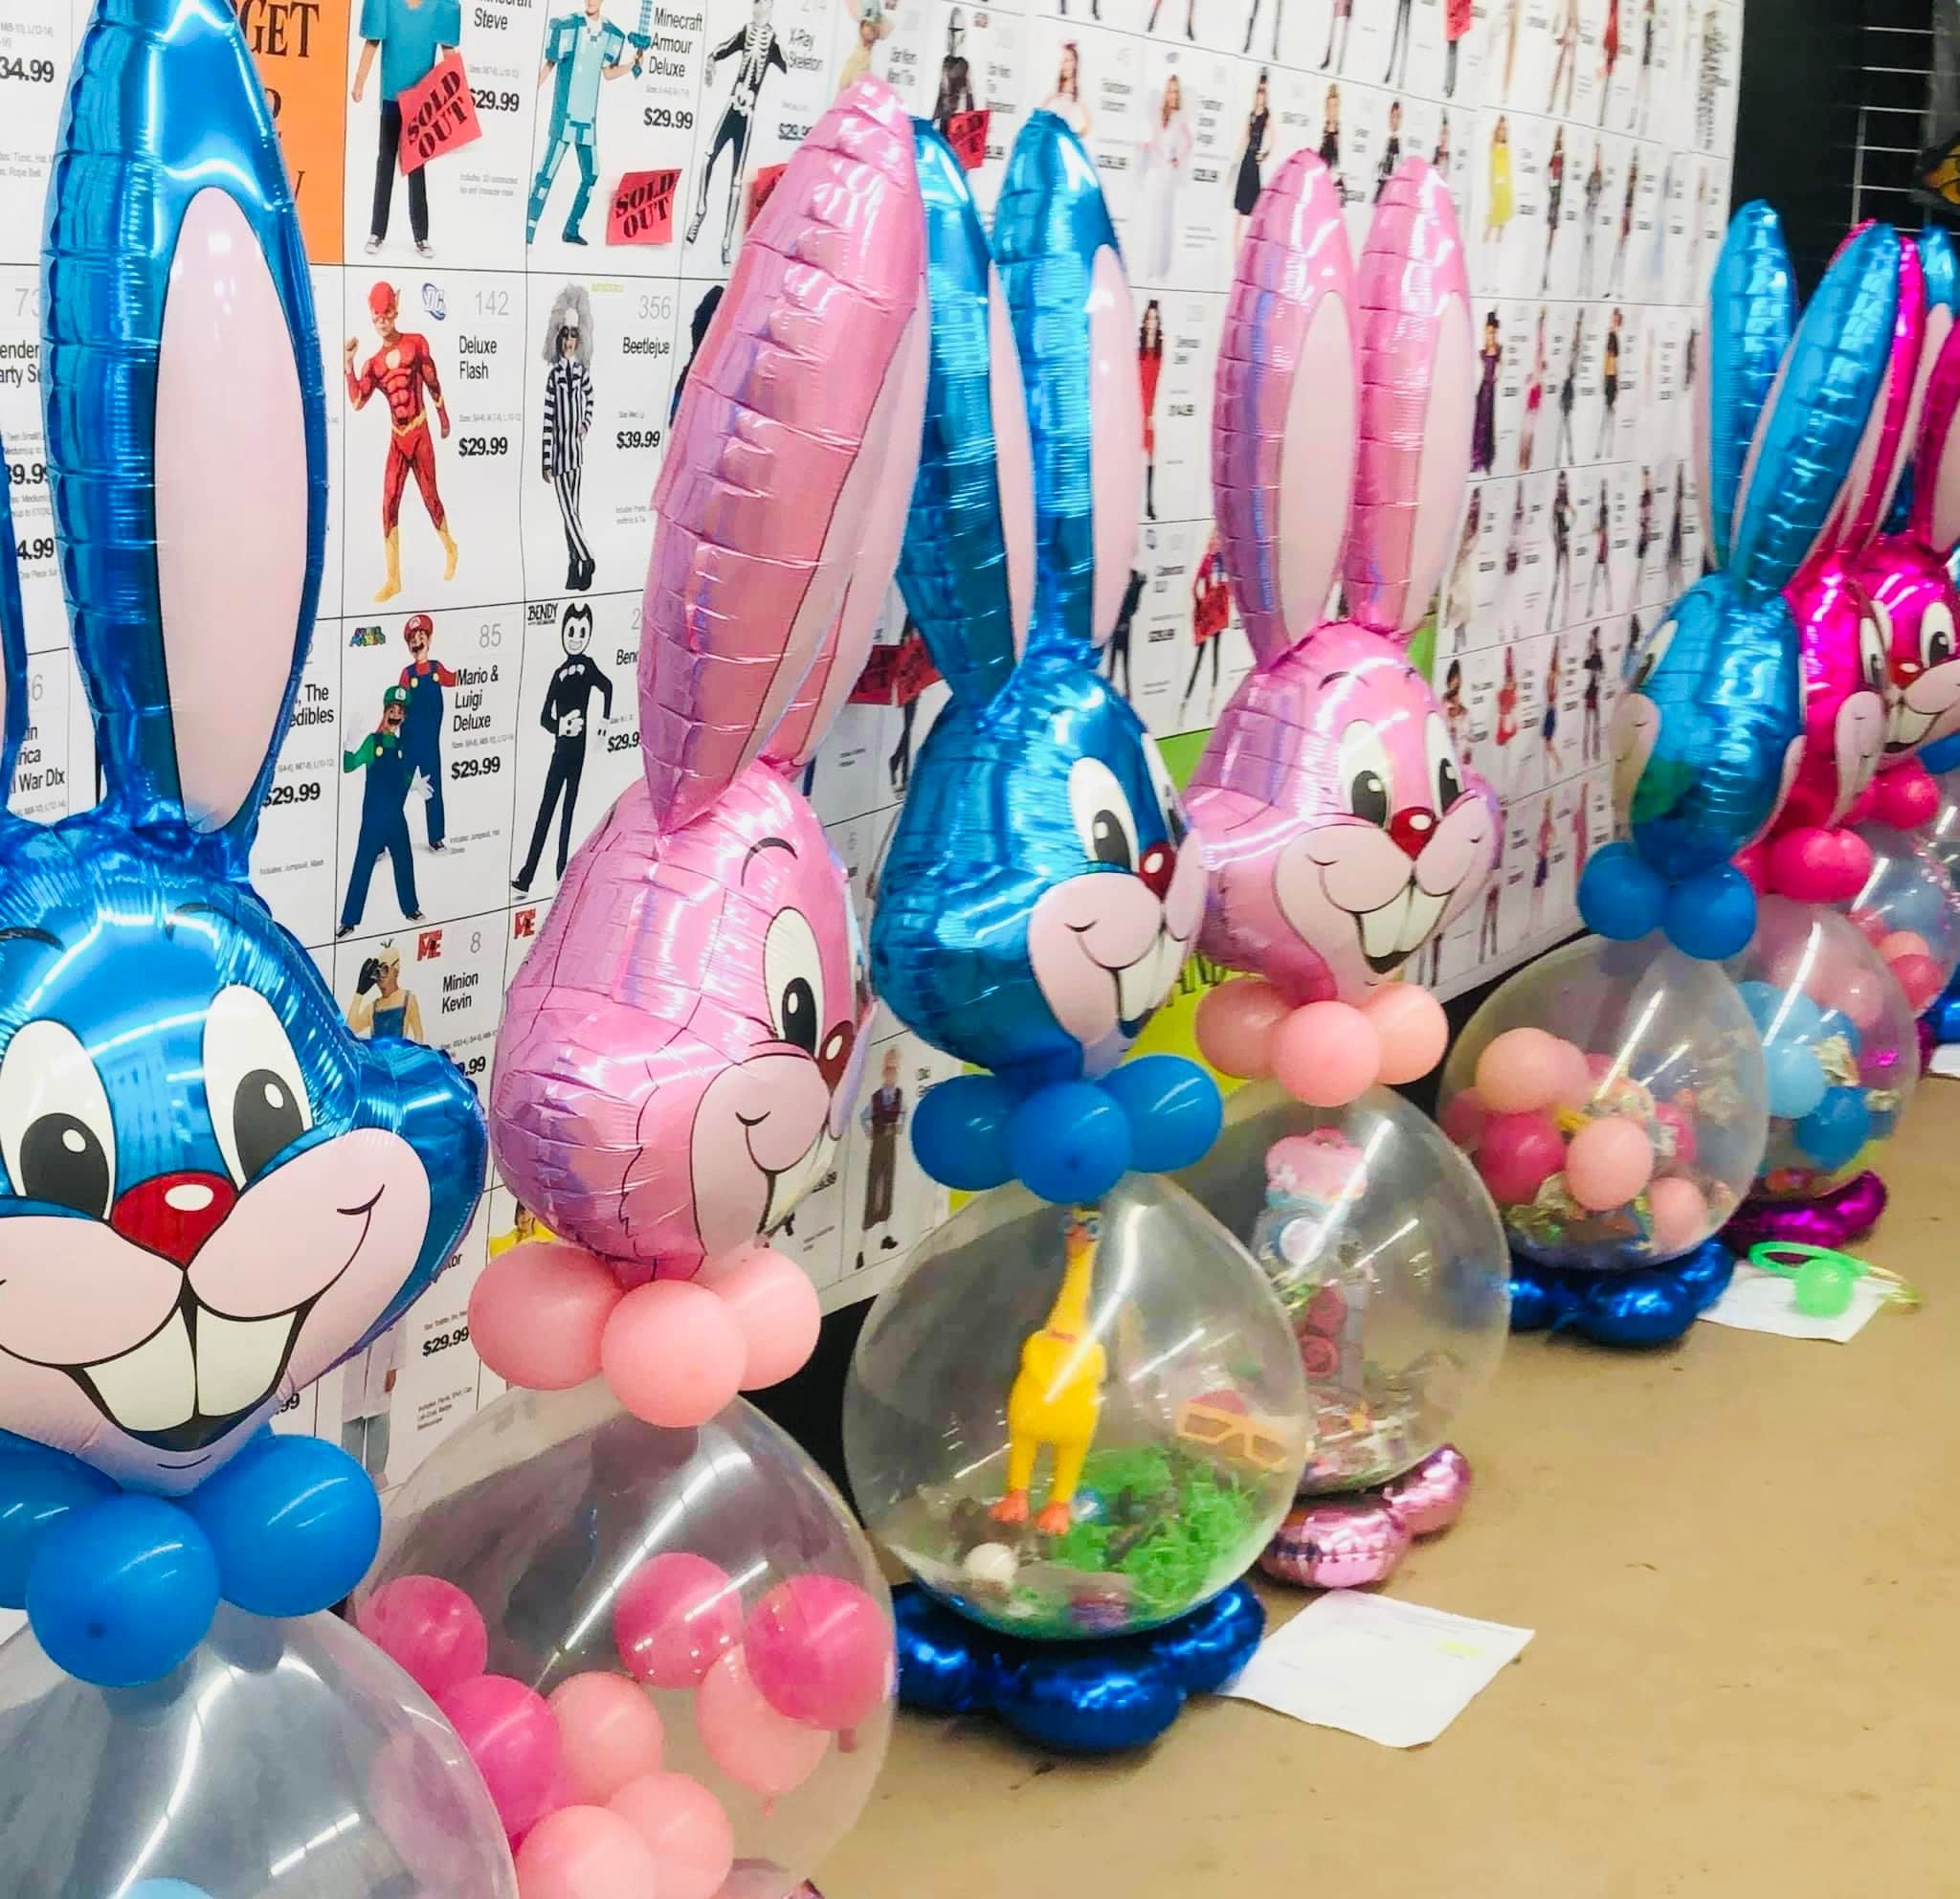 Stuffed Easter Bunny - POPPartyballoons